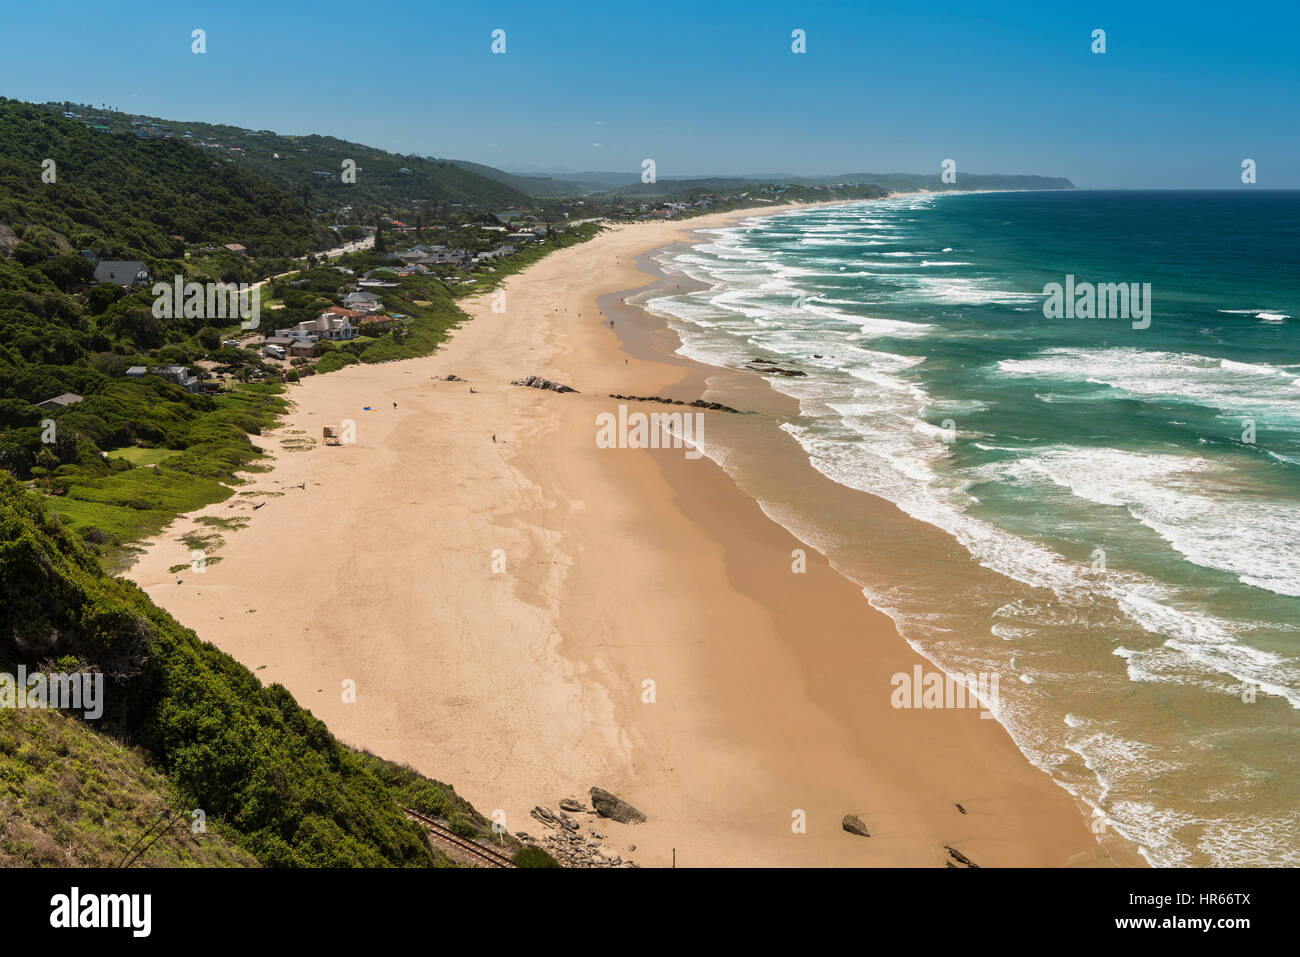 Overview of Wilderness Beach from Dolphin's point, Western Cape, South Africa Stock Photo